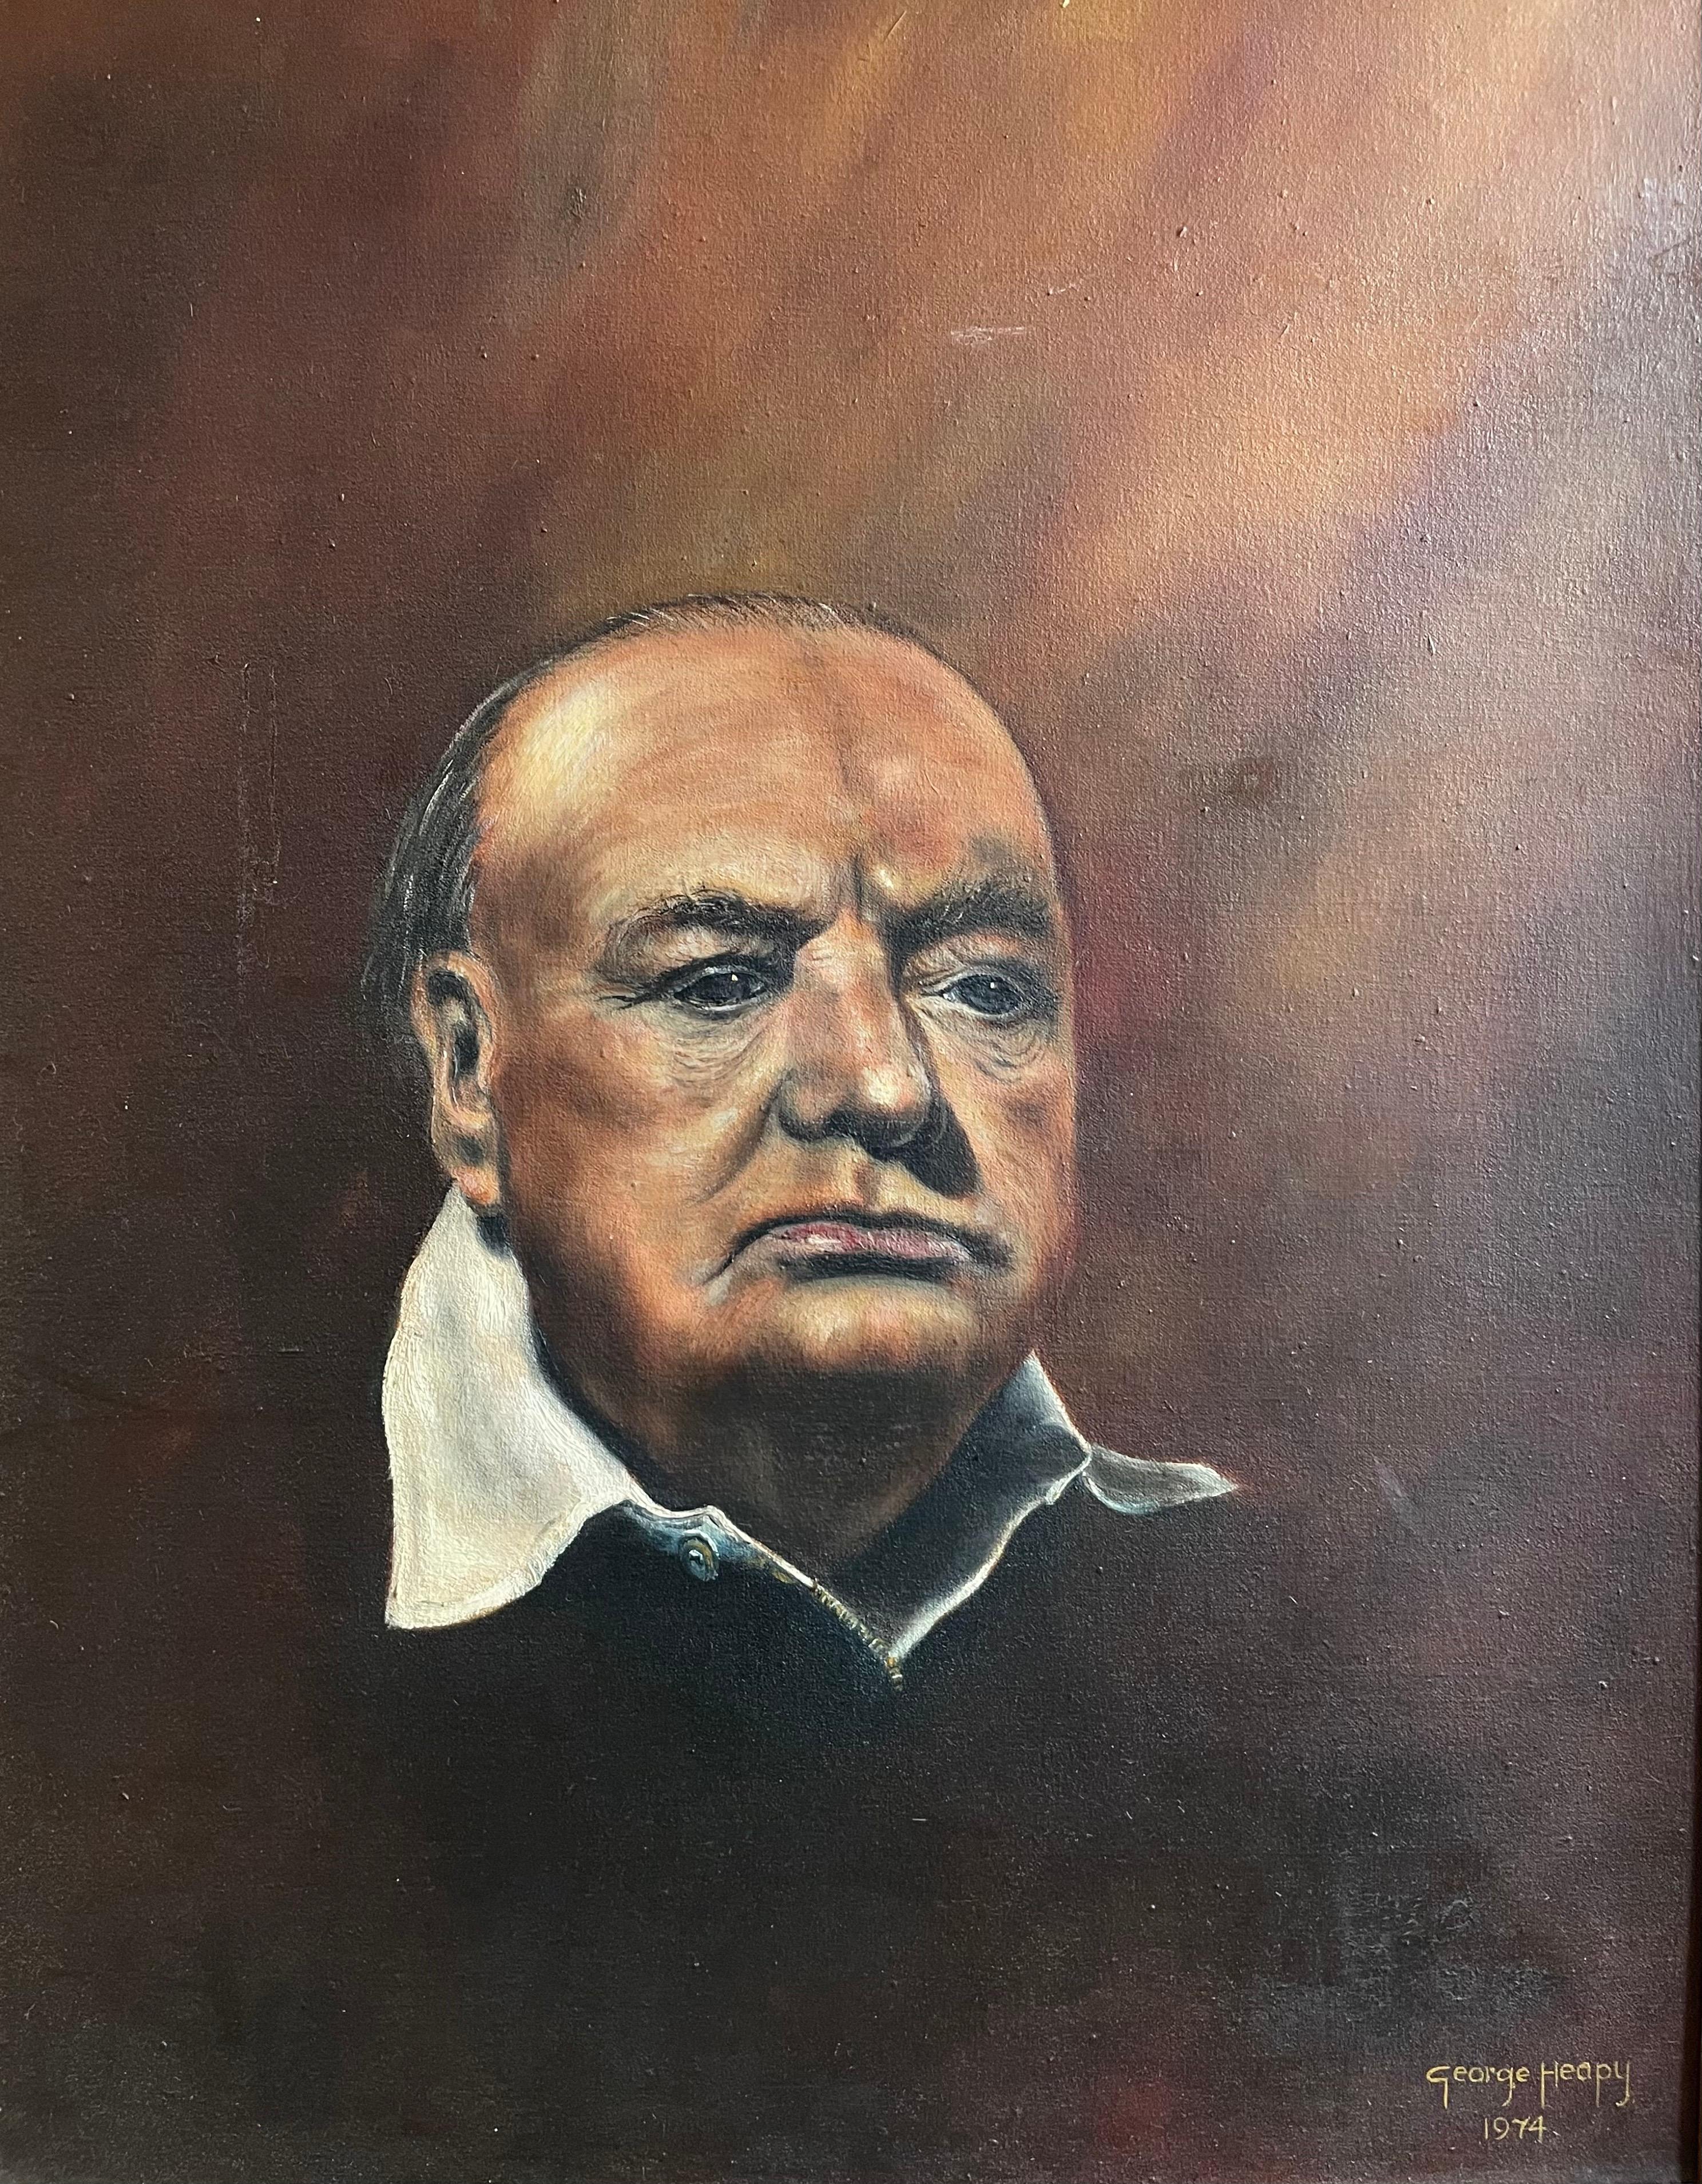 the painting of winston churchill